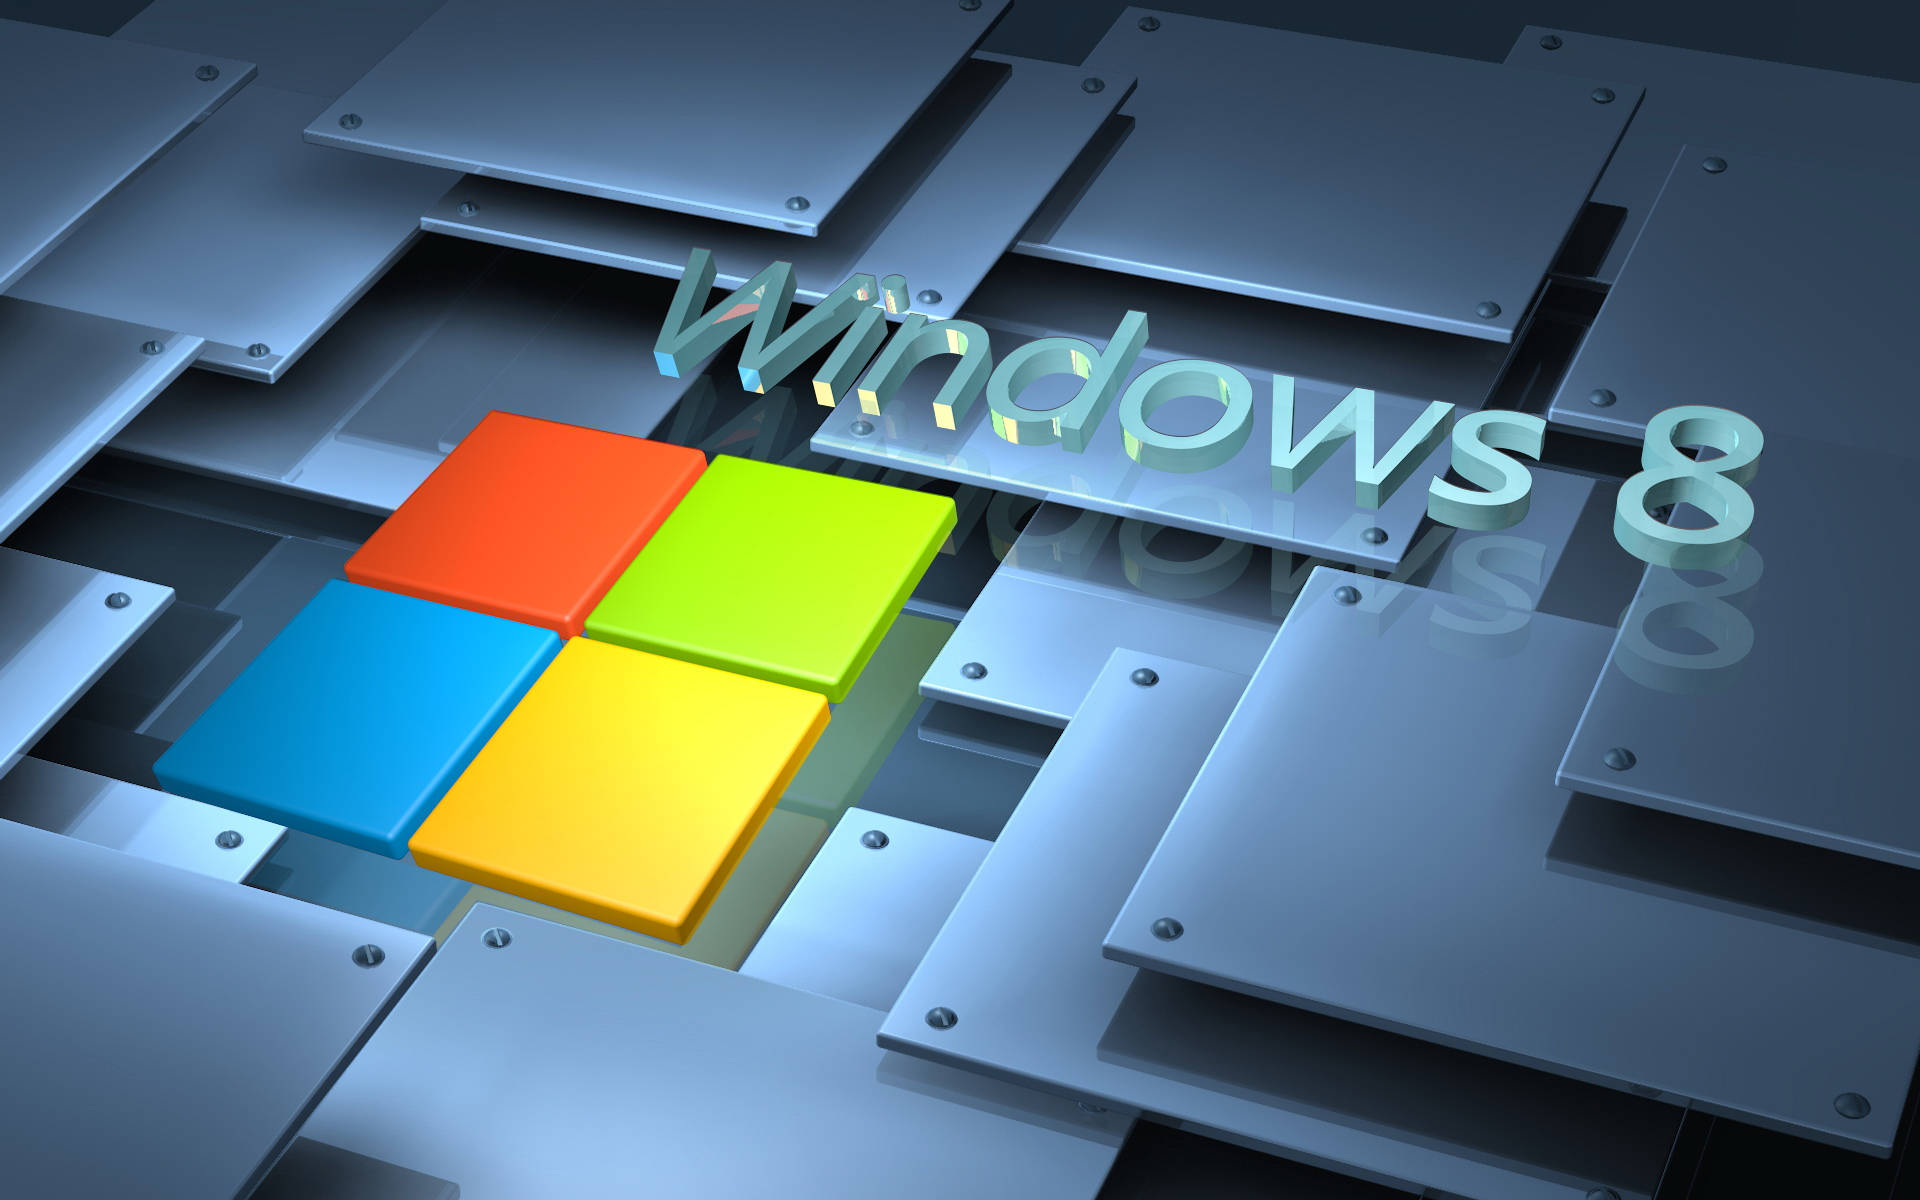 Windows 8 Background With Steel Tiles Background